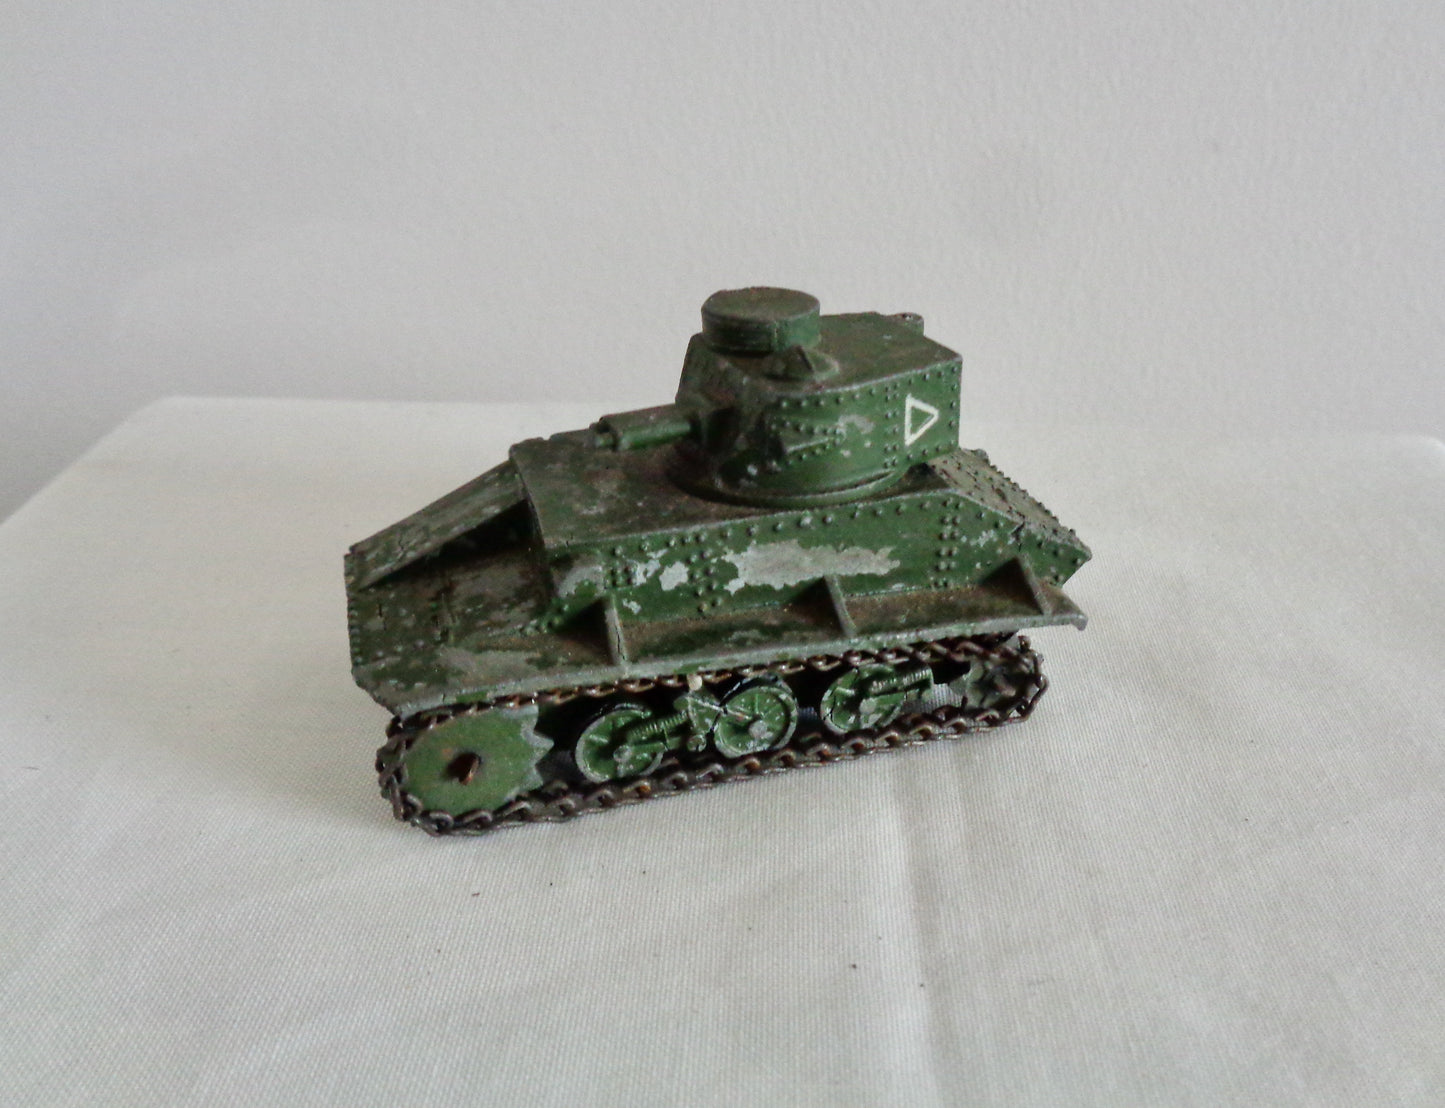 1930s Dinky Toys Vickers Armstrong Light Tank British Army Model No. 152a